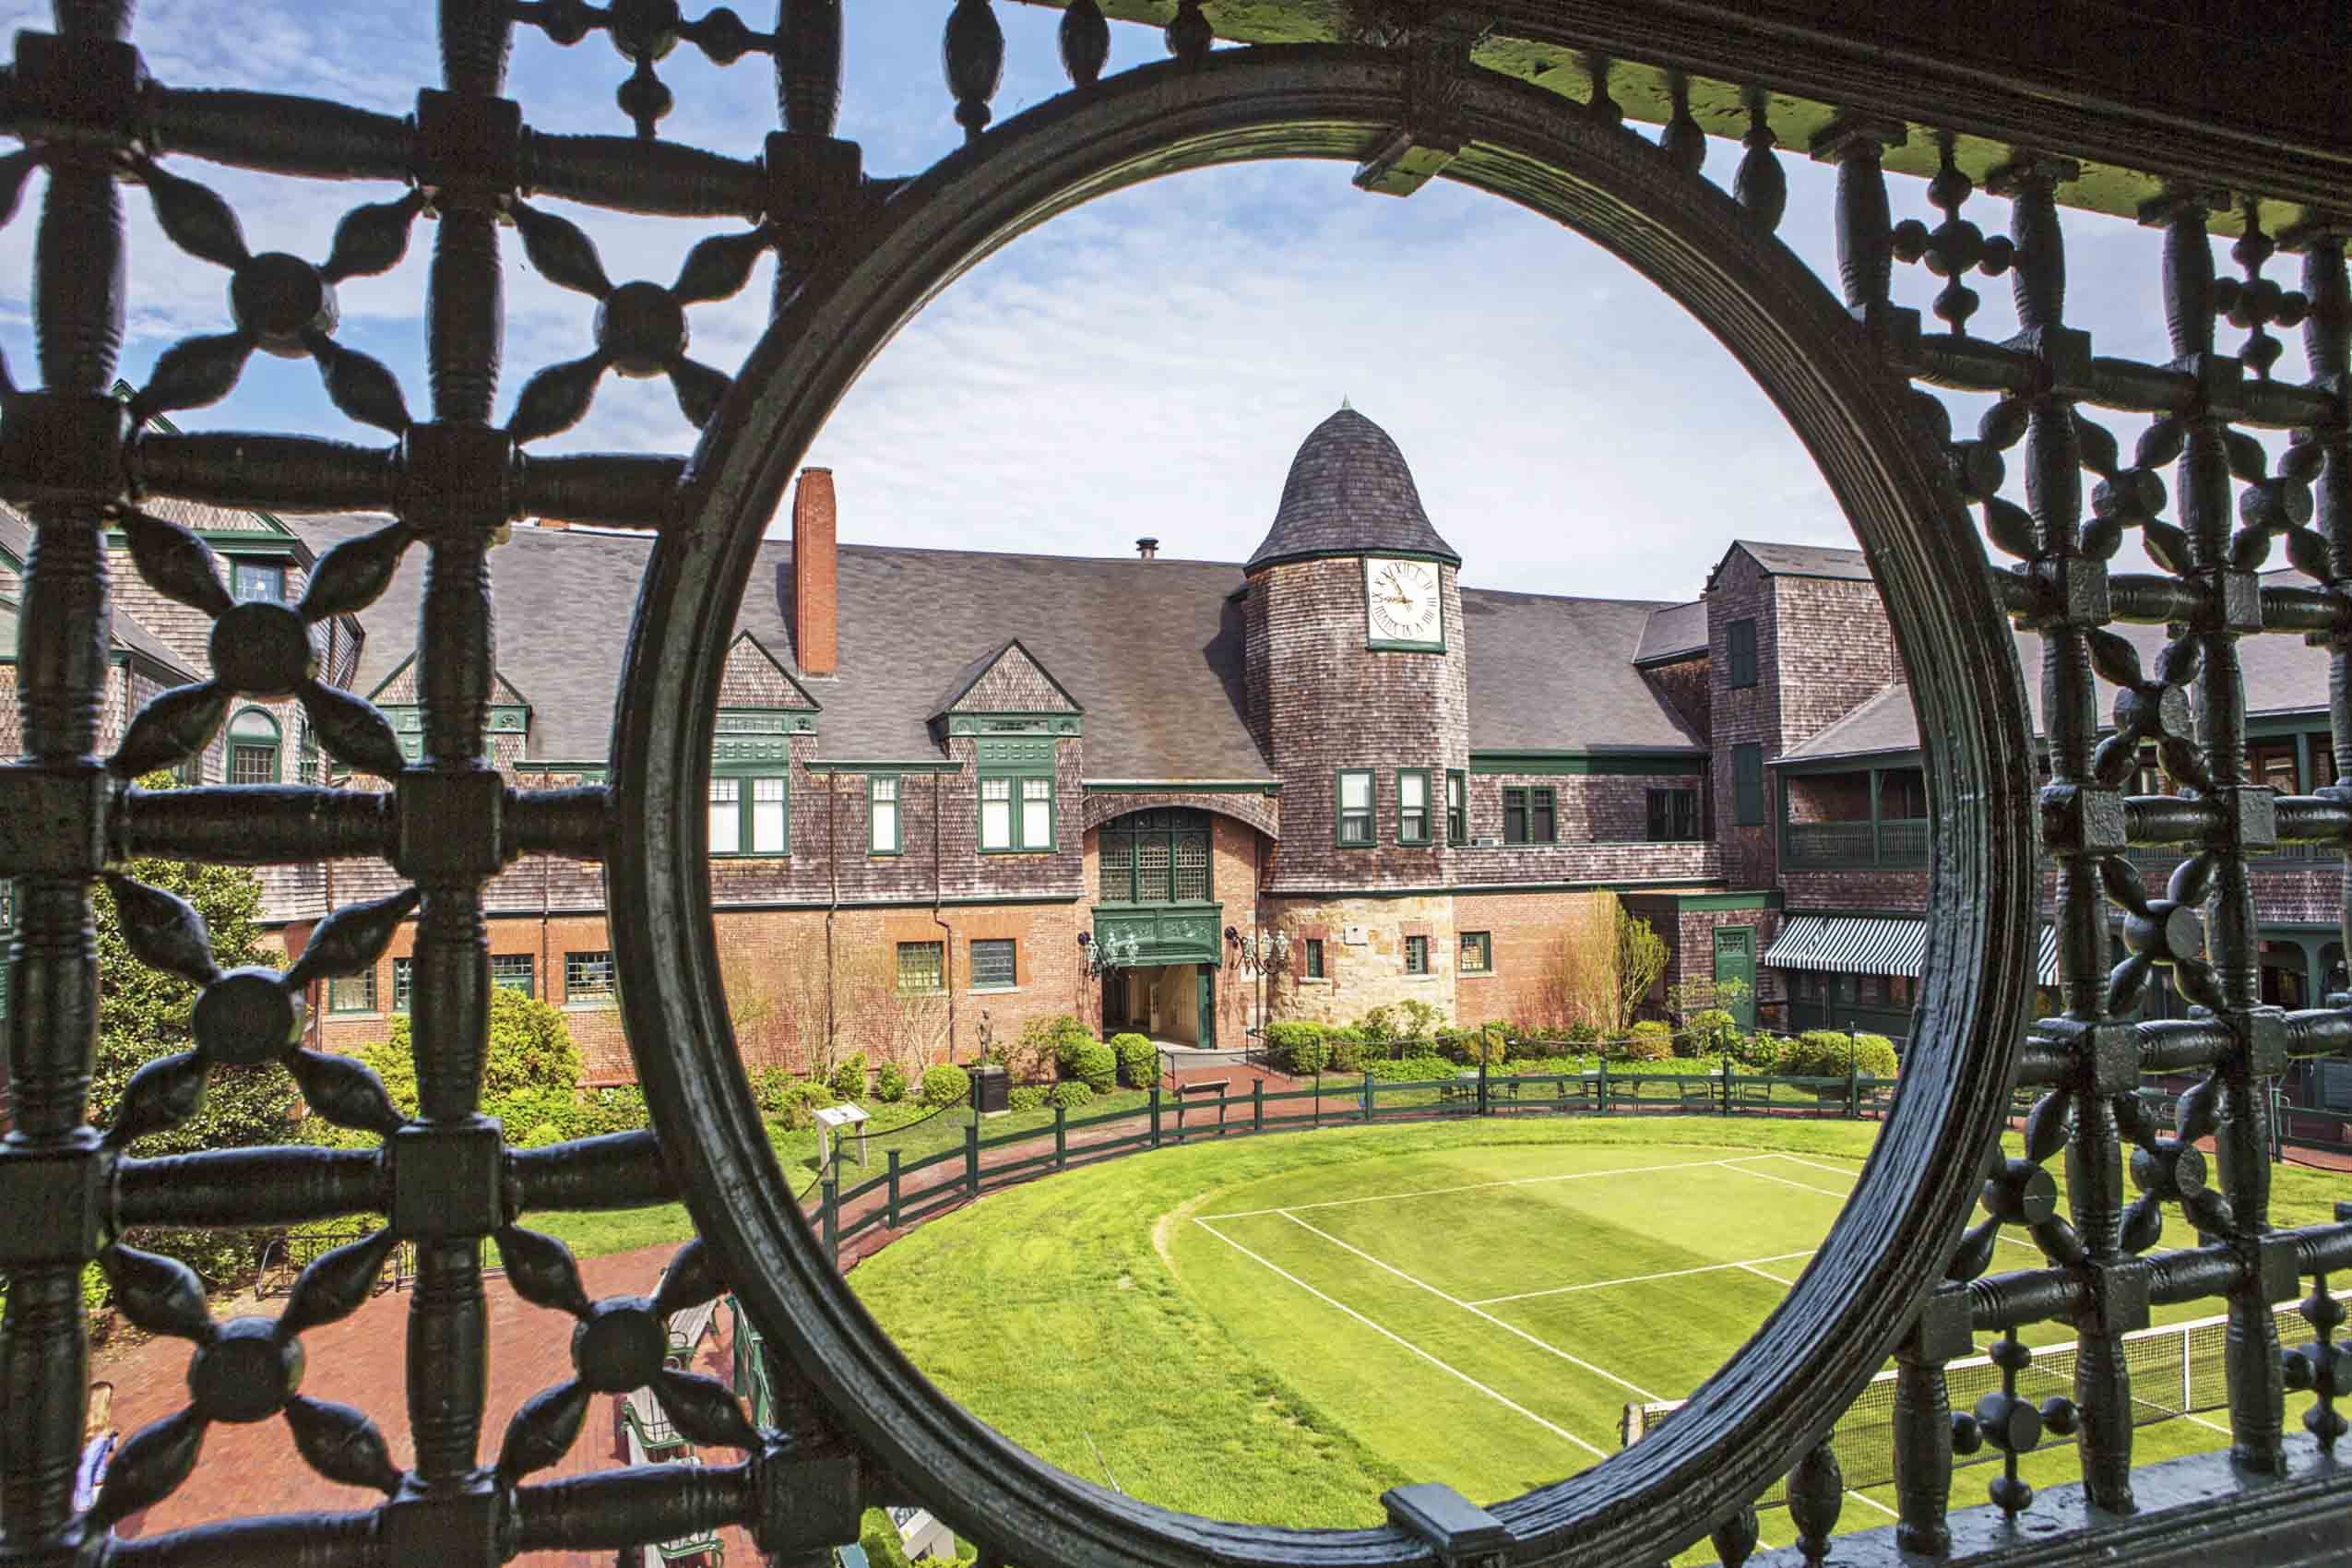 History Shingle Style at the Tennis Hall of